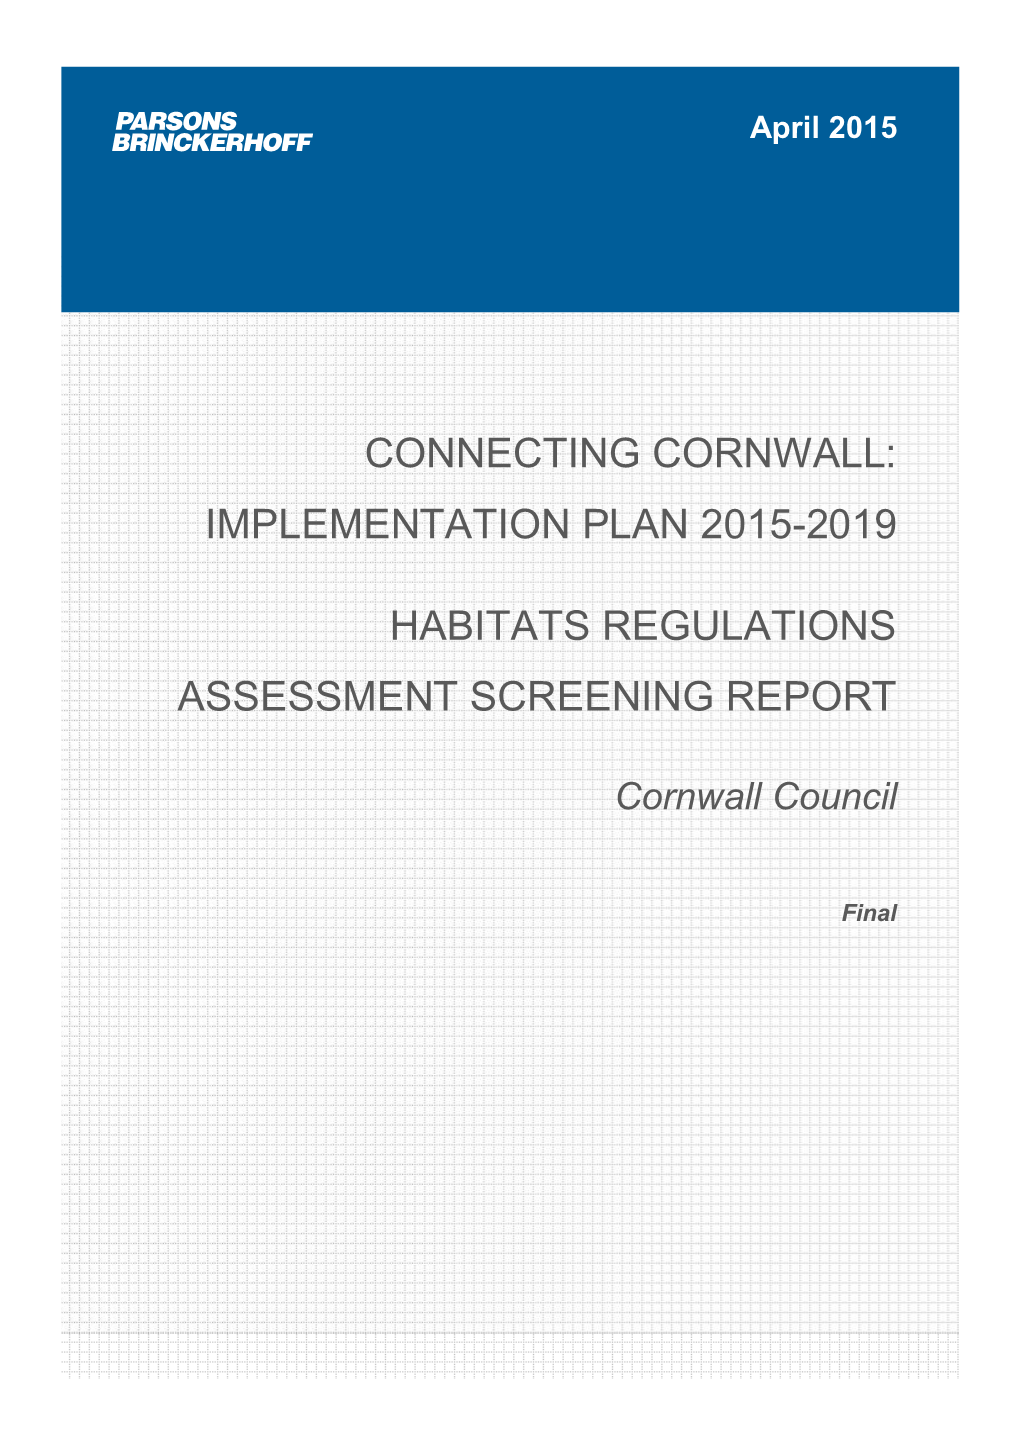 Connecting Cornwall: Implementation Plan 2015-2019